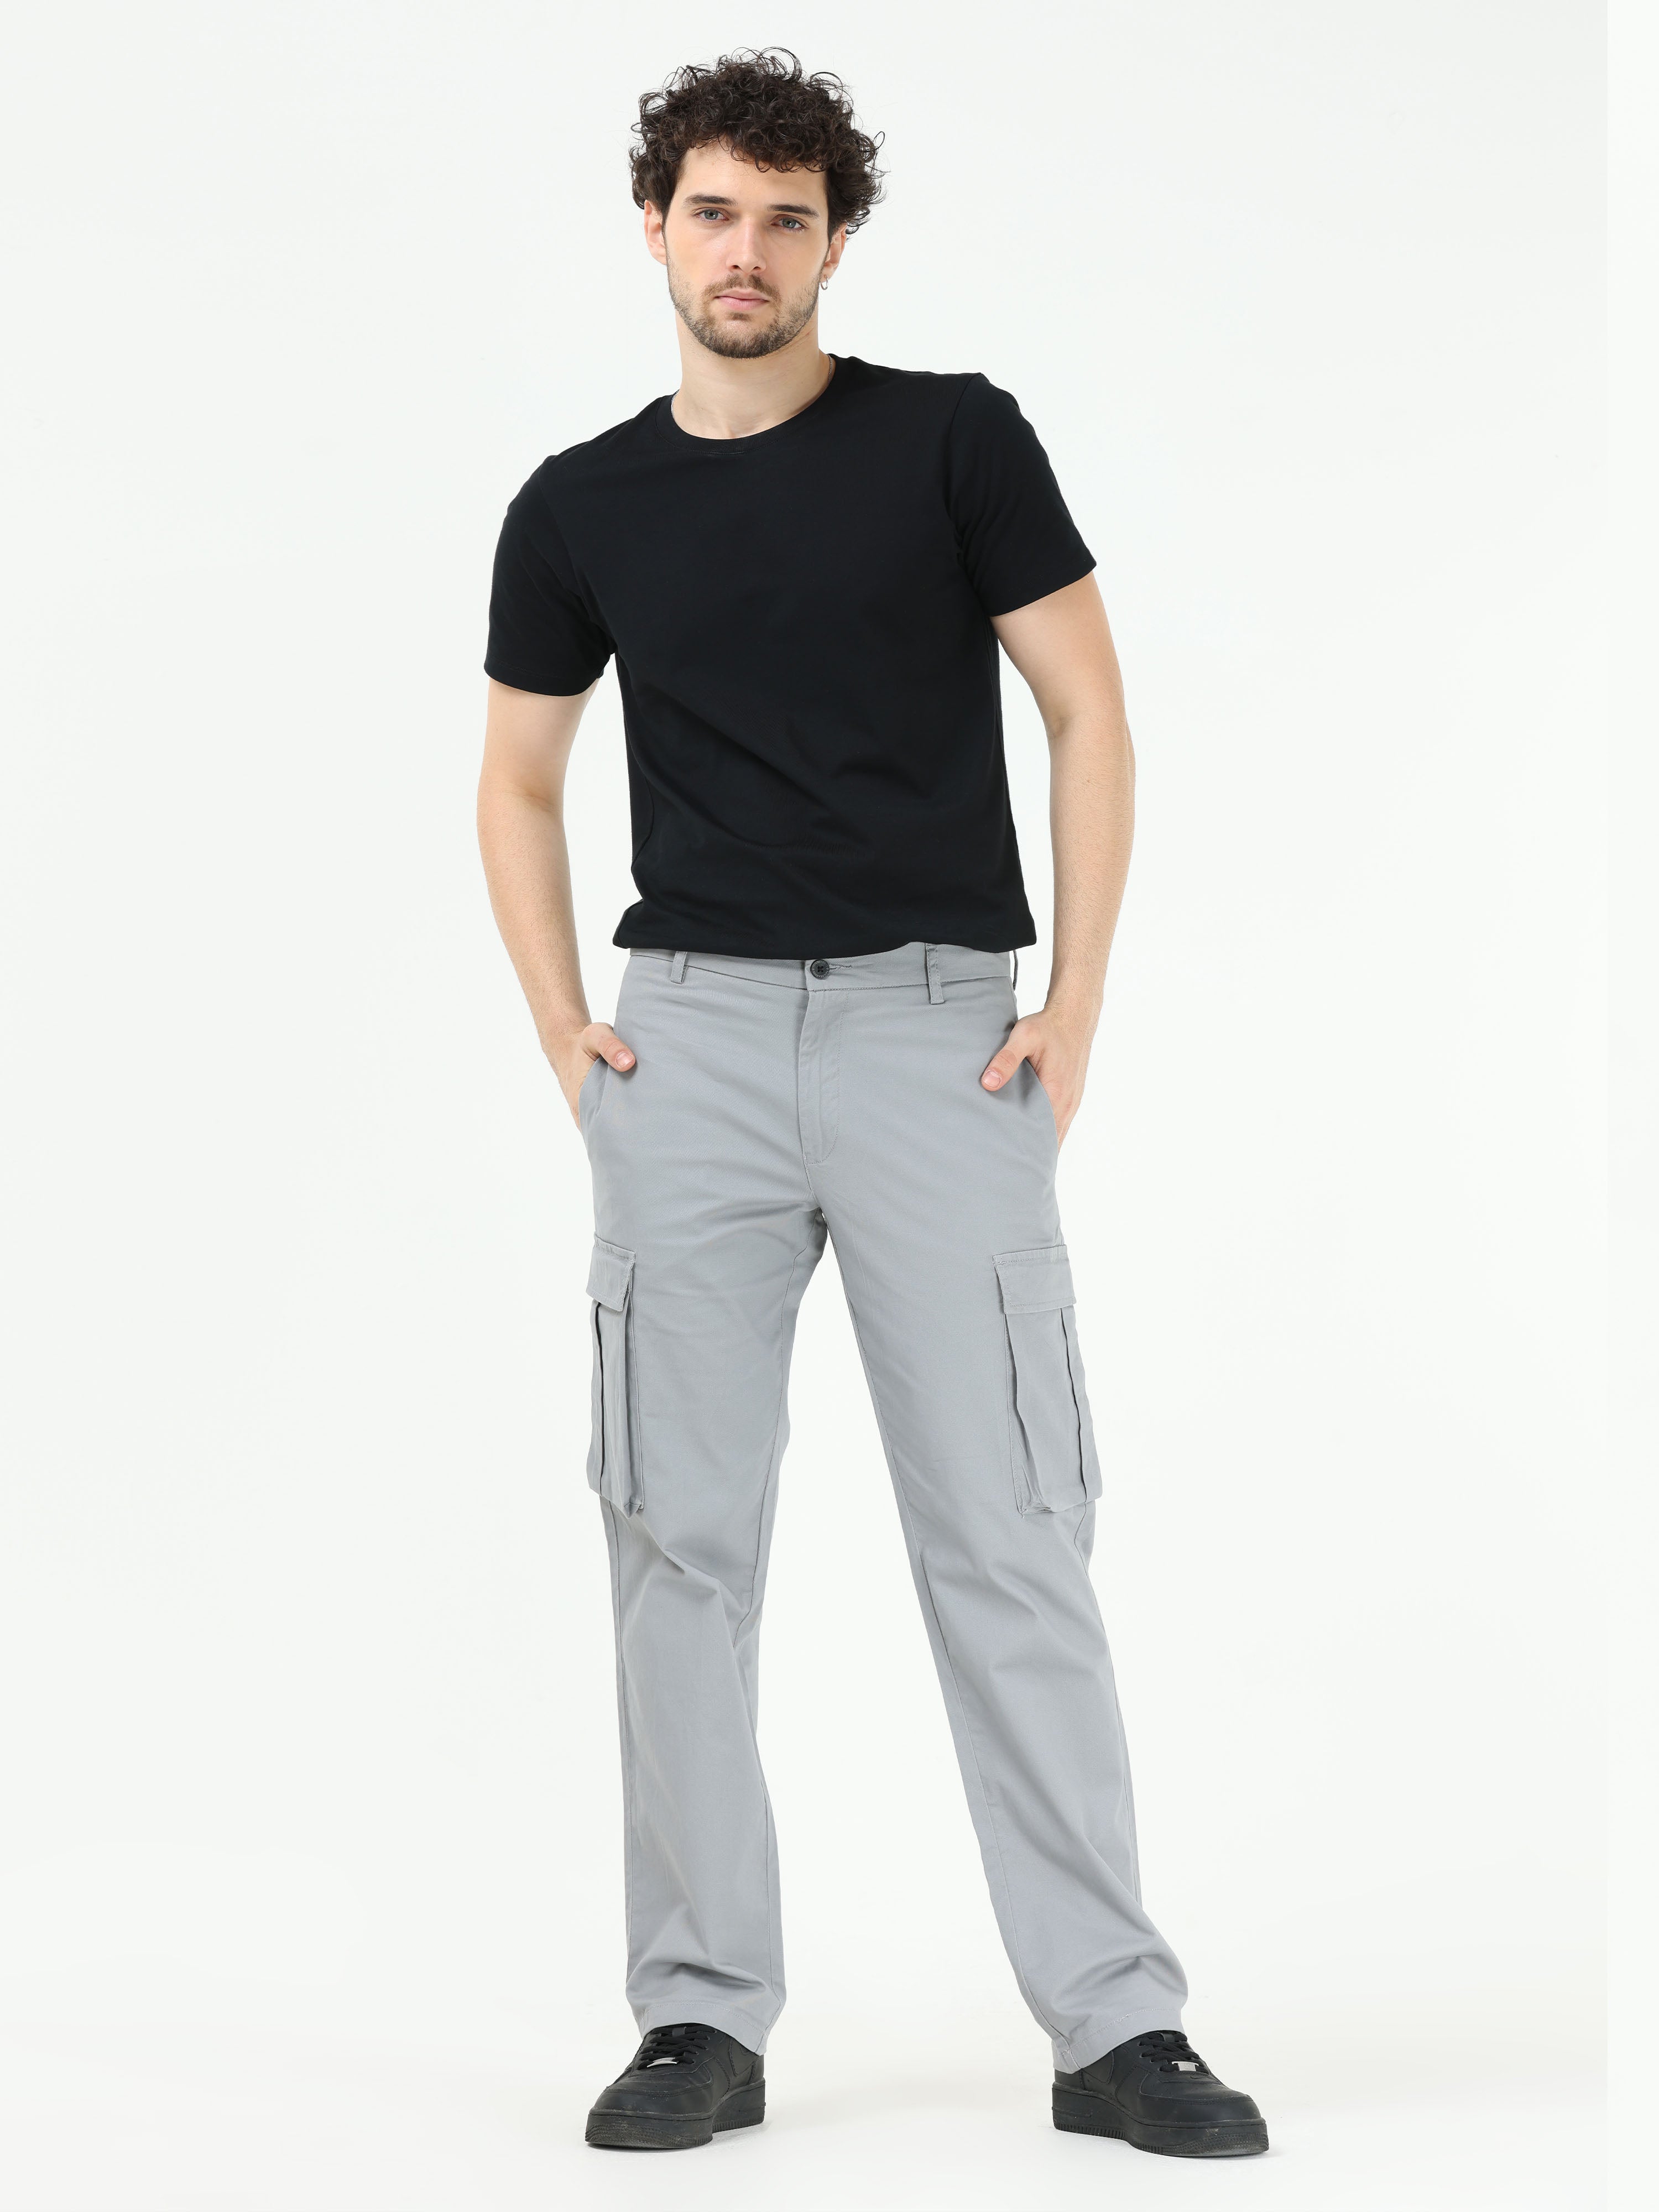 Finest Twill Light Grey Baggy Fit Cargo